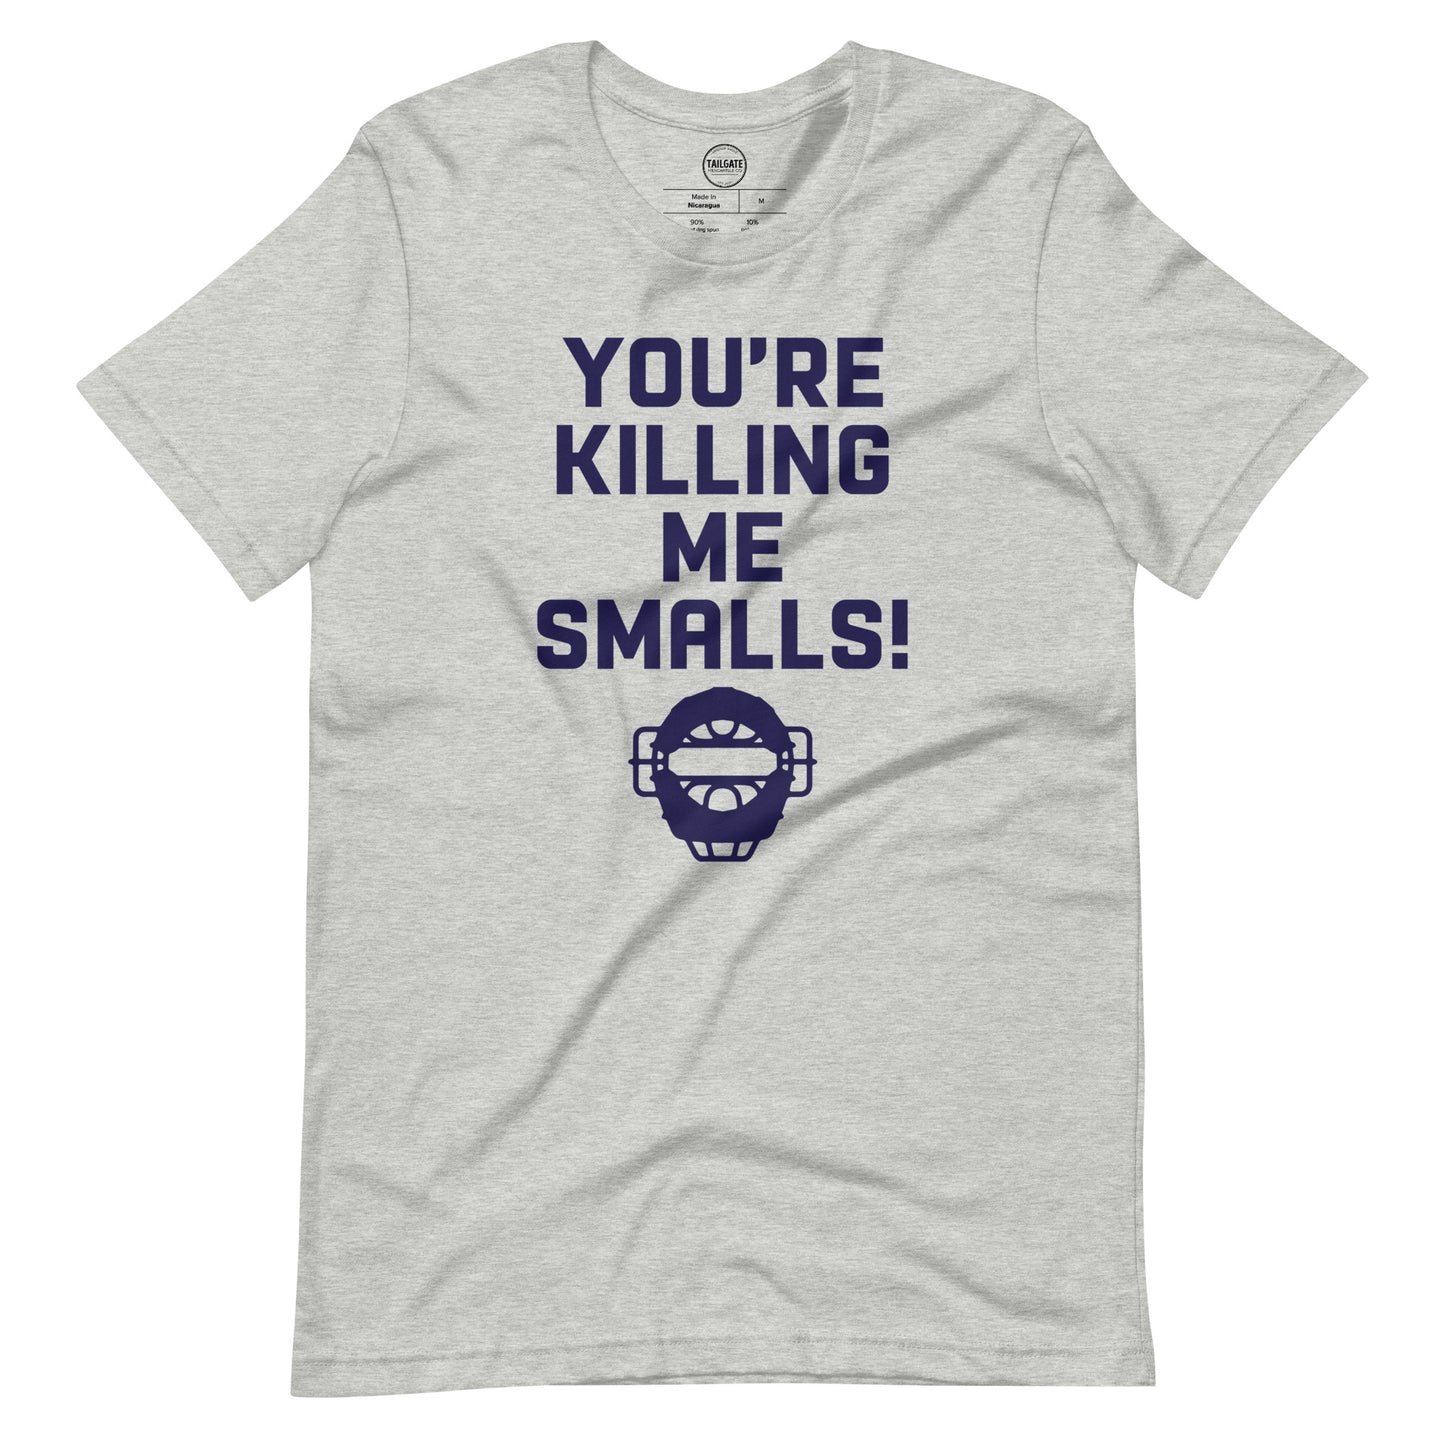 Image of heather athletics grey t-shirt with design of "You're Killing Me Smalls!" in navy located on centre chest. FOR.EV.ER. is an homage to the great baseball movie "The Sandlot". This design is exclusive to Tailgate Mercantile and available only online.